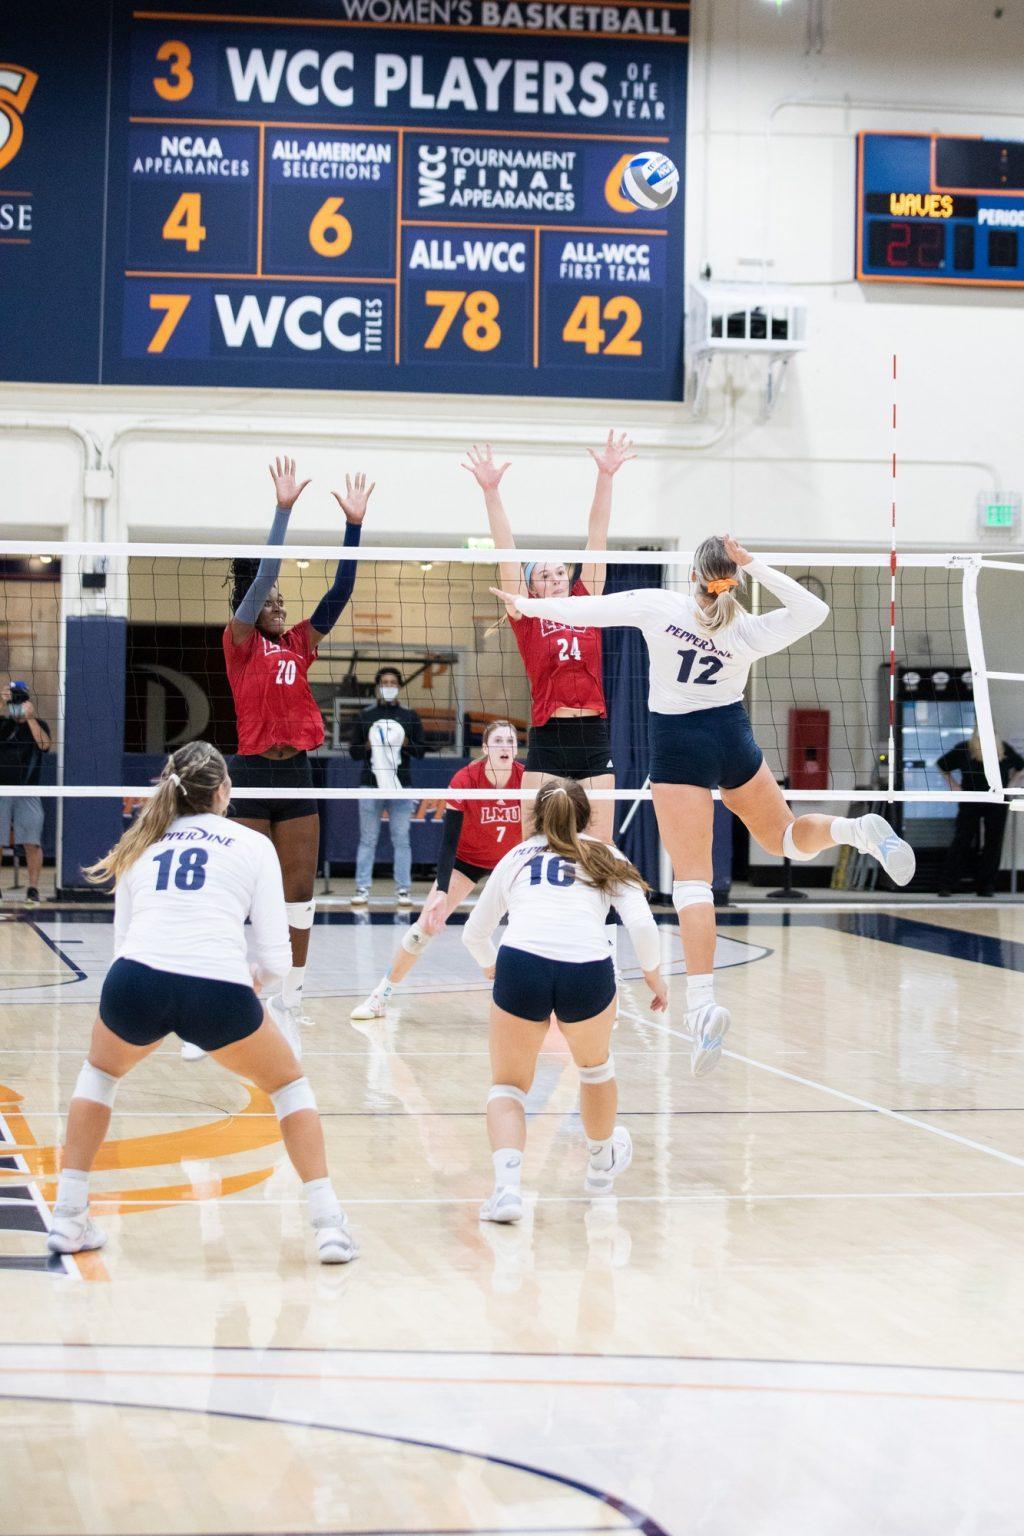 Sophomore middle blocker Meg Brown goes for a spike against LMU blockers Oct. 2. The Waves have a six game win streak, with Brown starting each match.